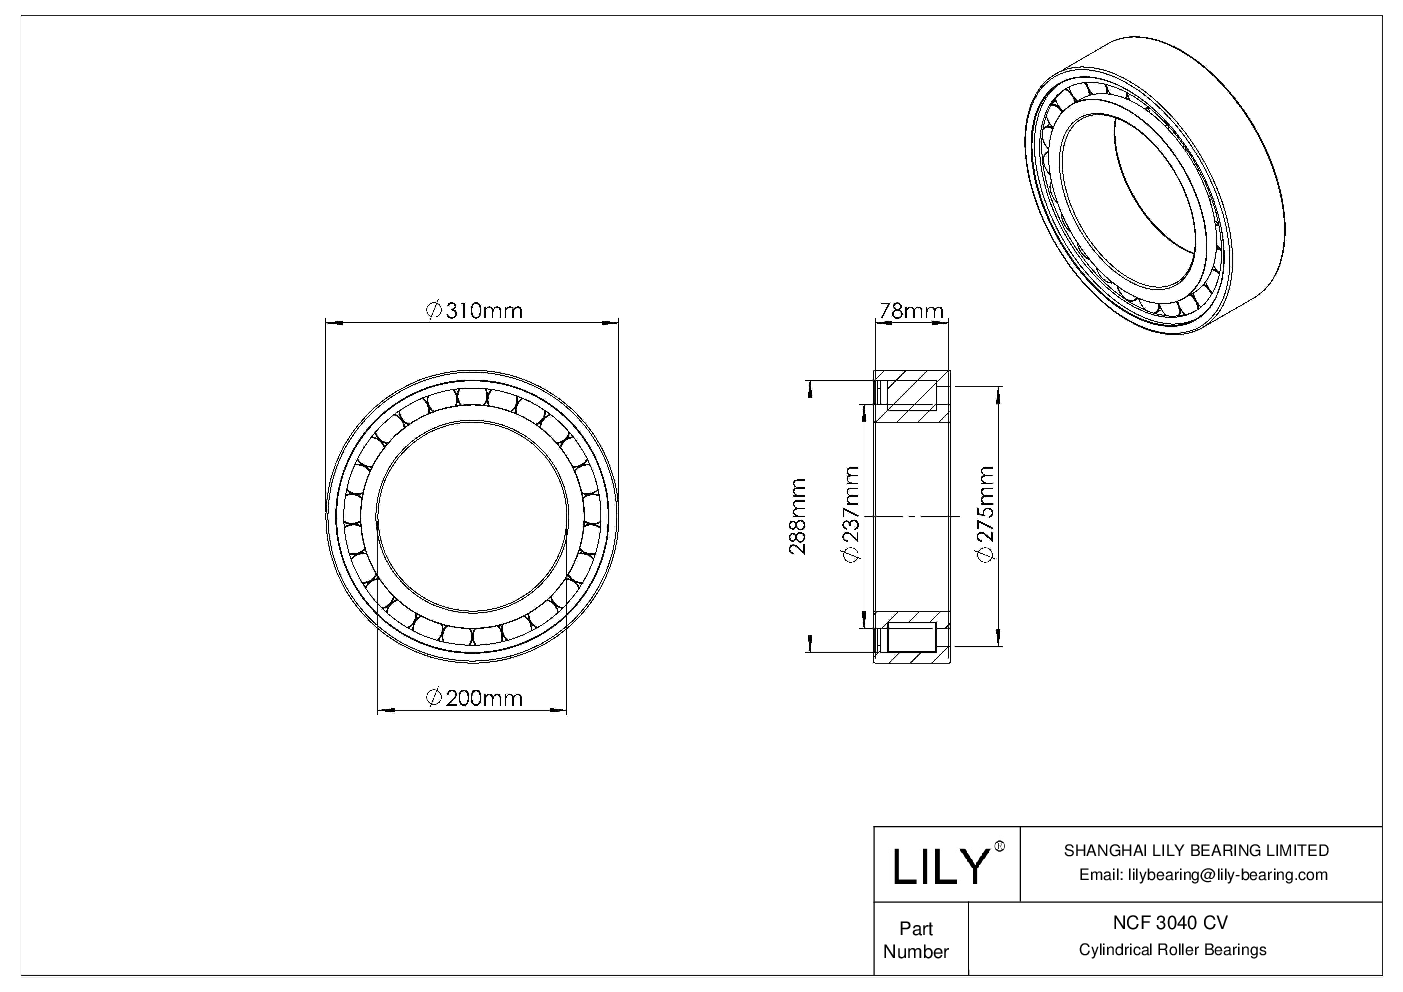 NCF 3040 CV Single Row Full Complement Cylindrical Roller Bearings cad drawing